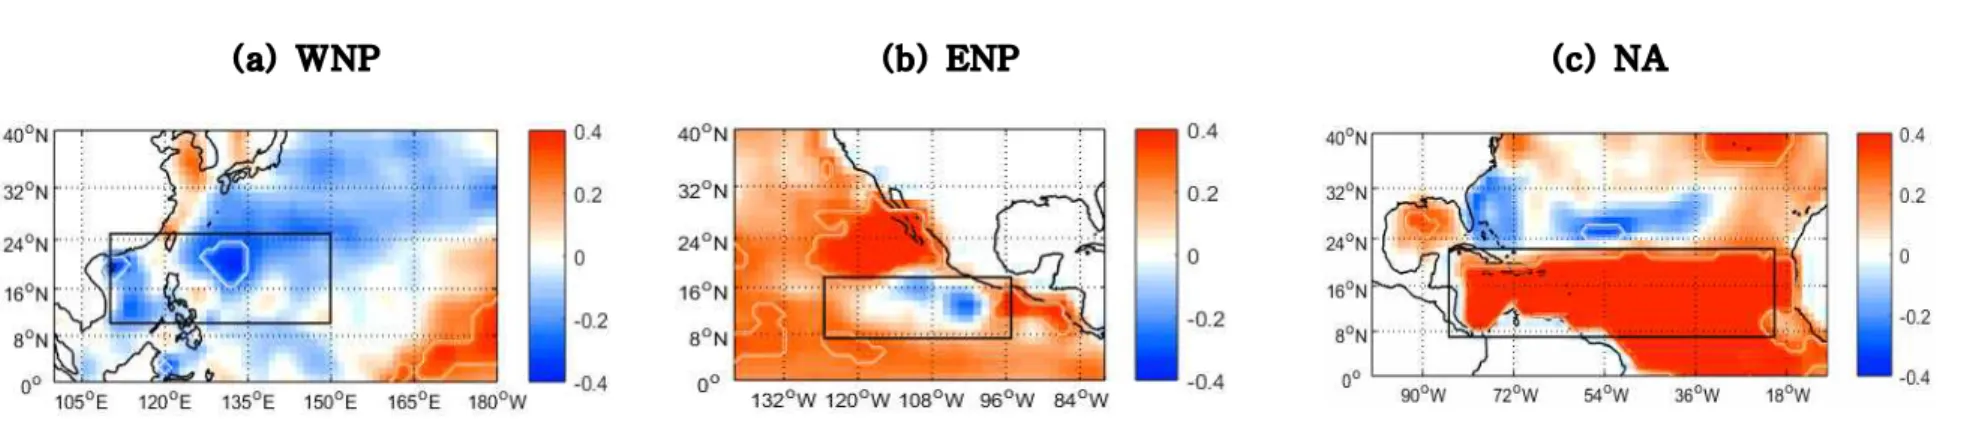 Fig. 6. Same as Fig. 4, but correlation between sea surface temperature and number of TCs.